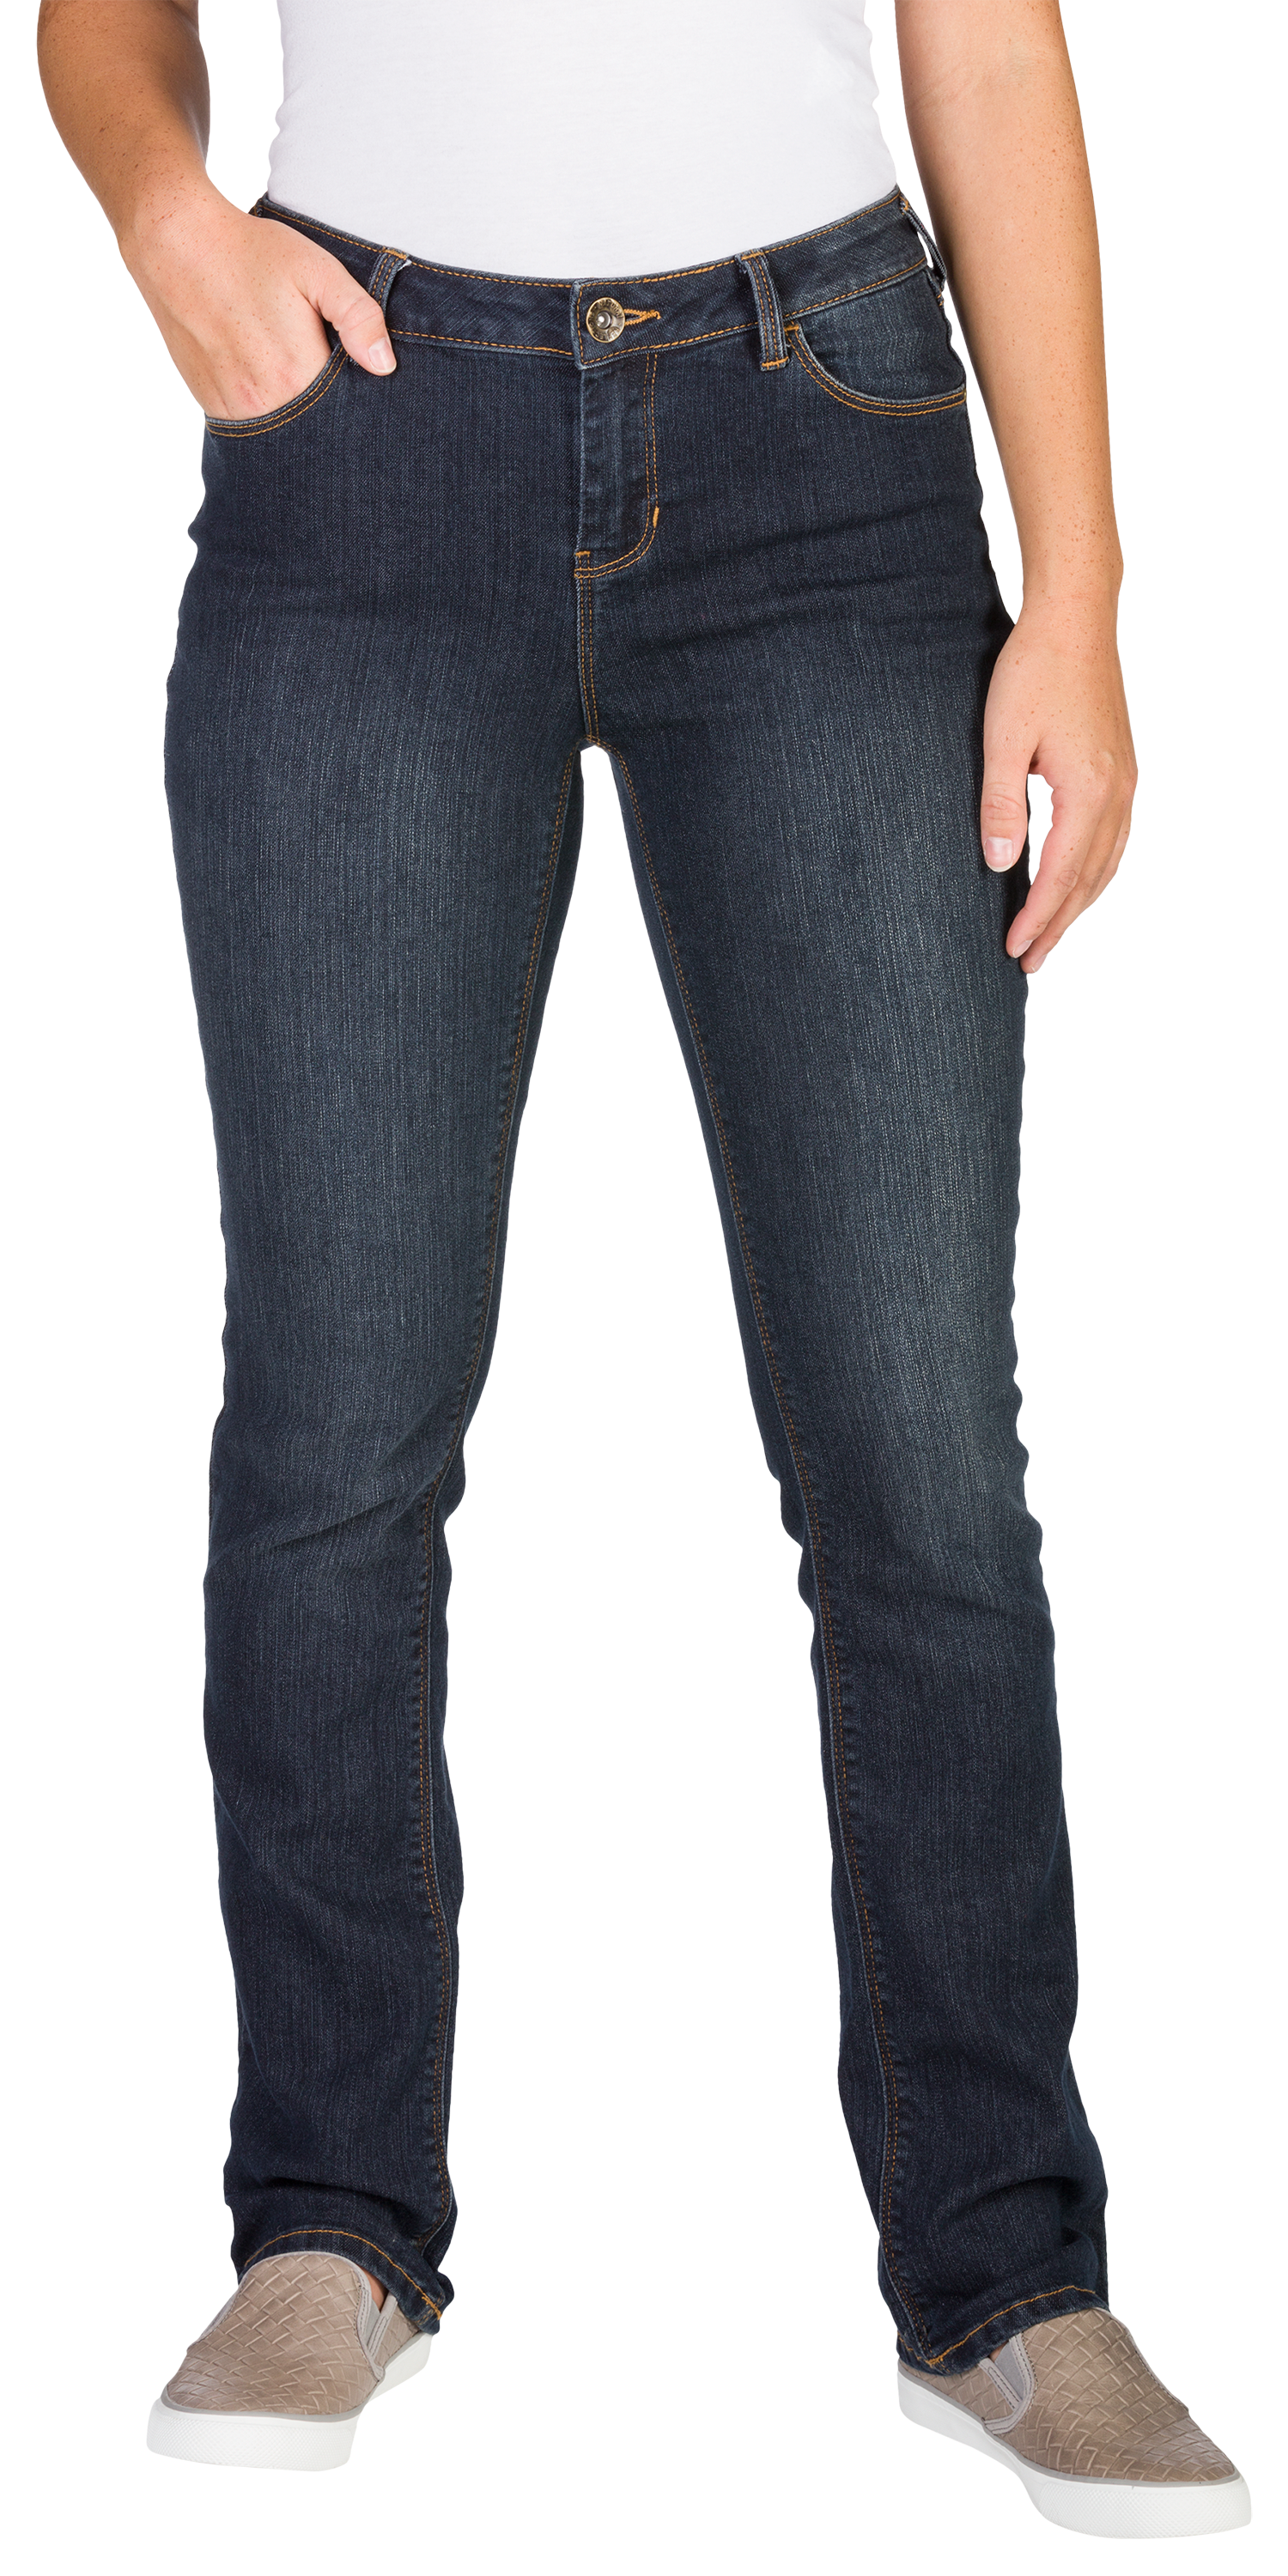 12 Tall Pants & Jeans for Women